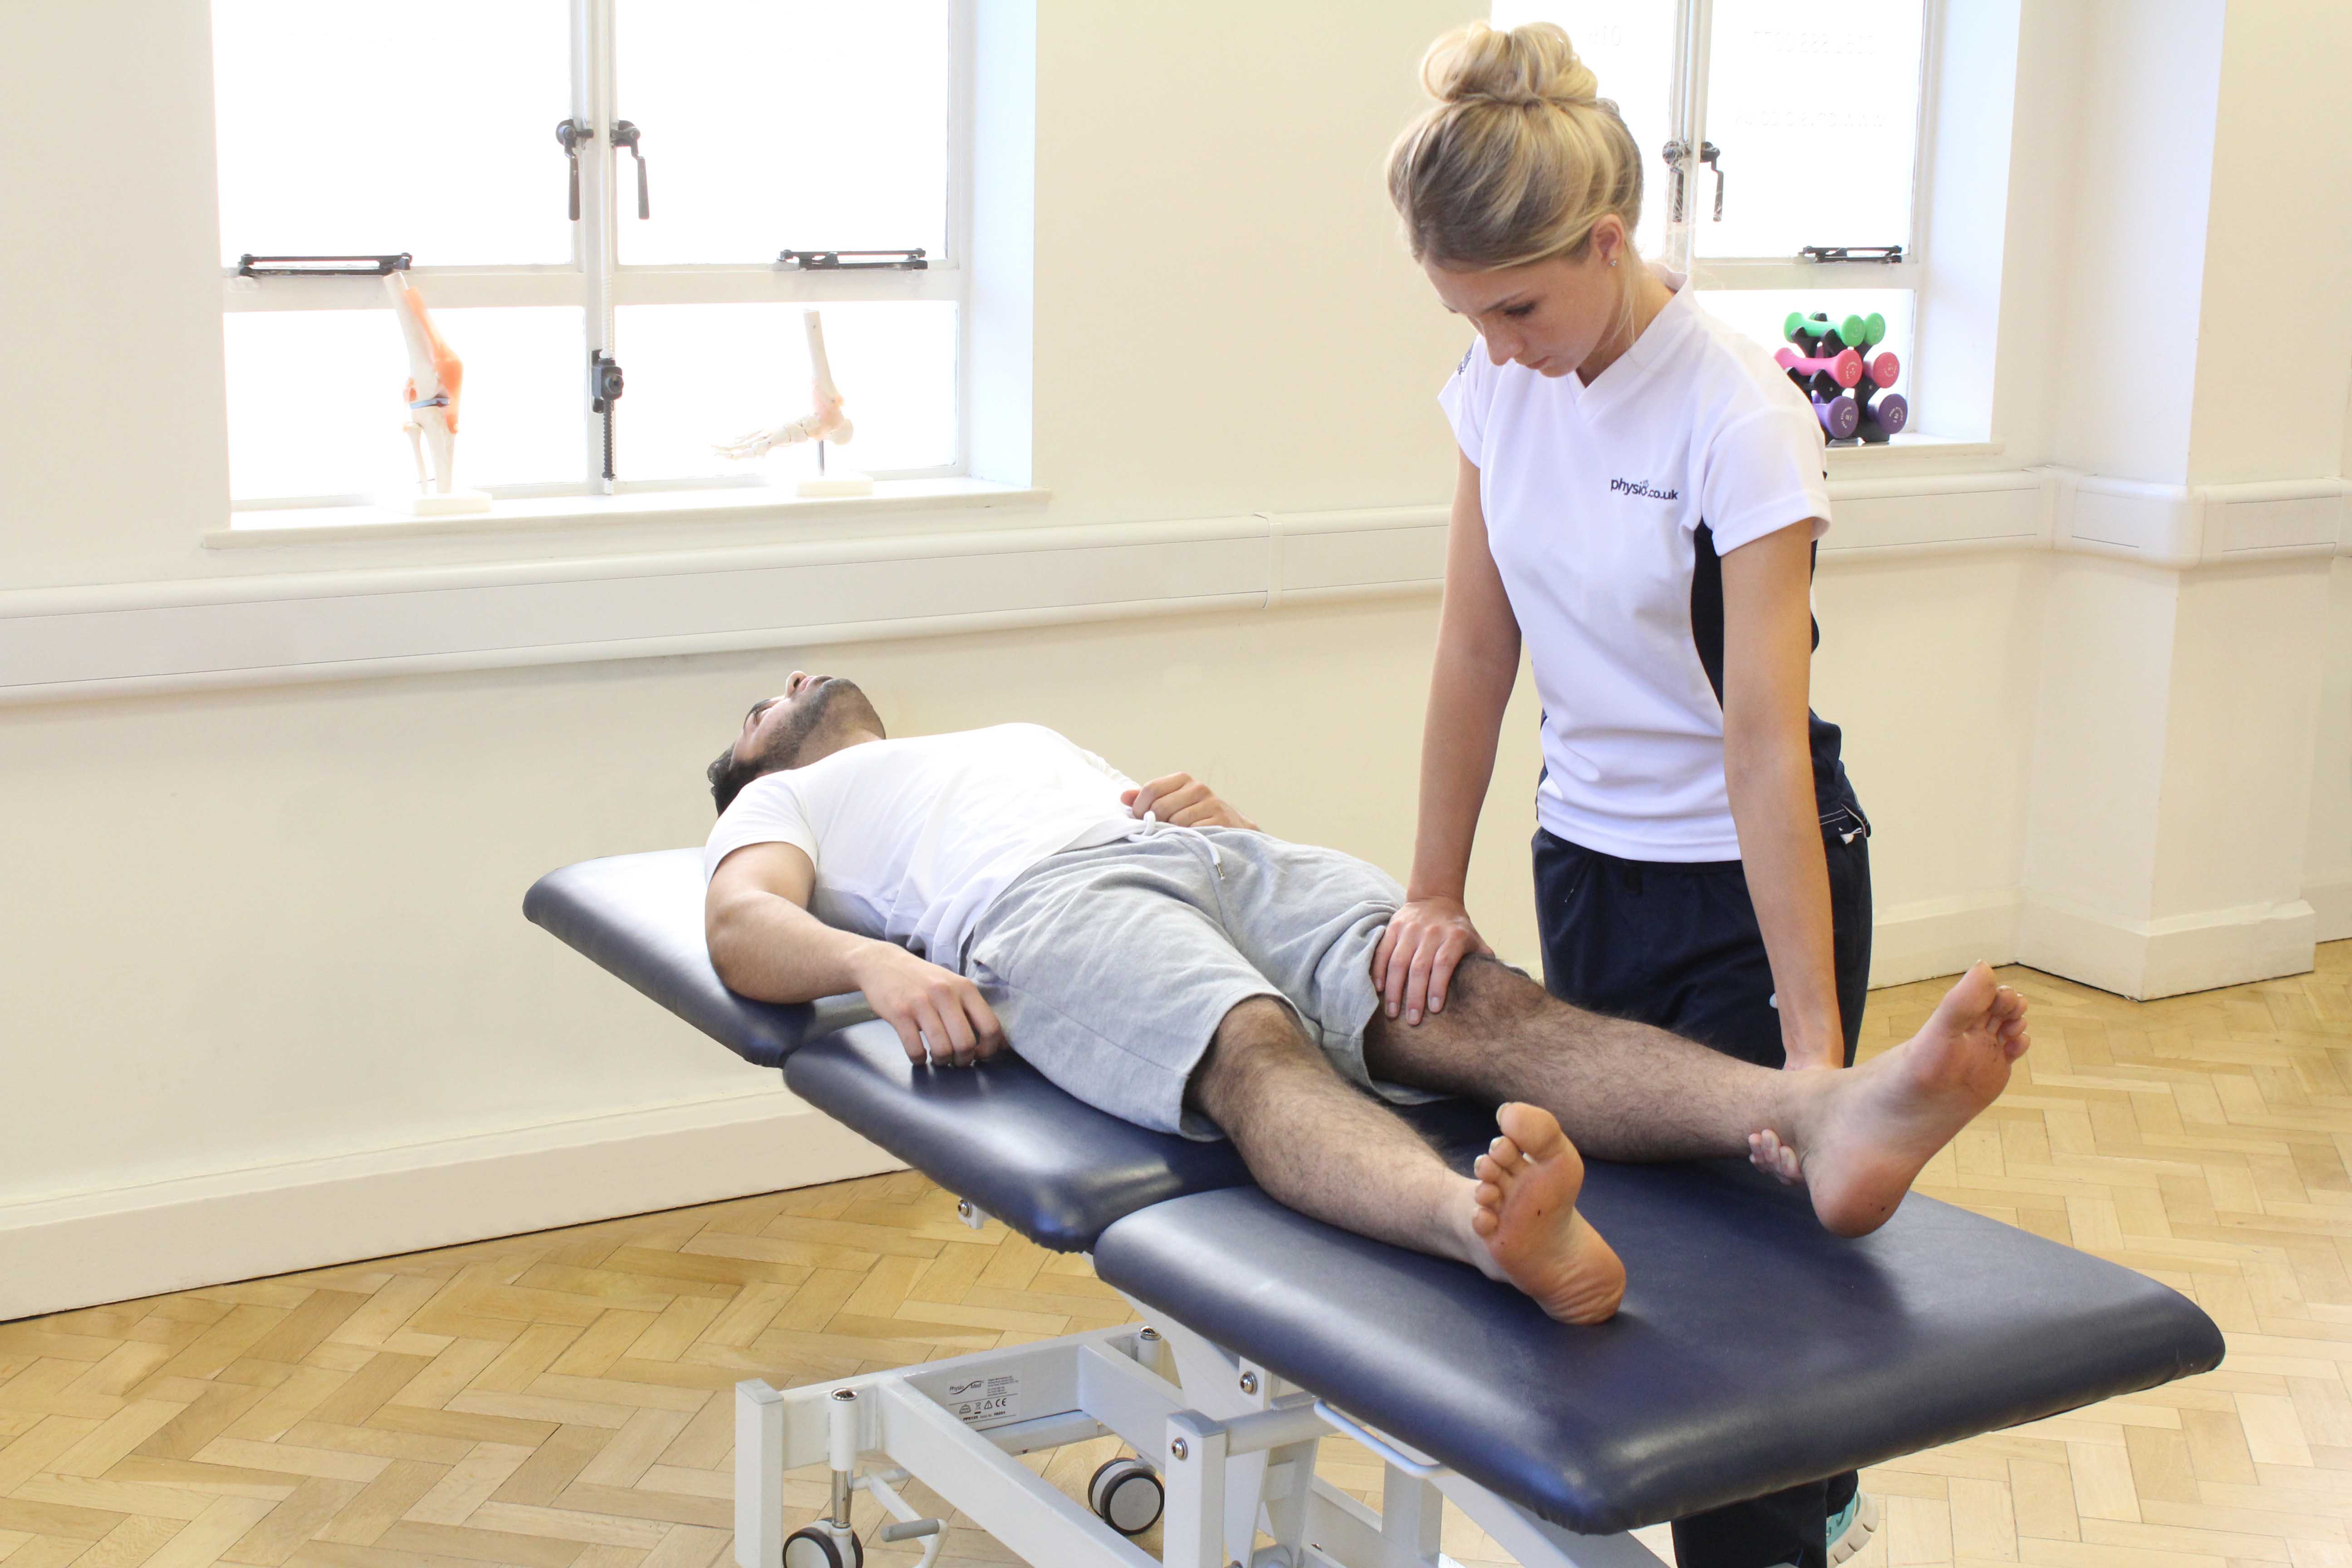 Knee joint mobilisations by a specialist musculoskeletal therapist